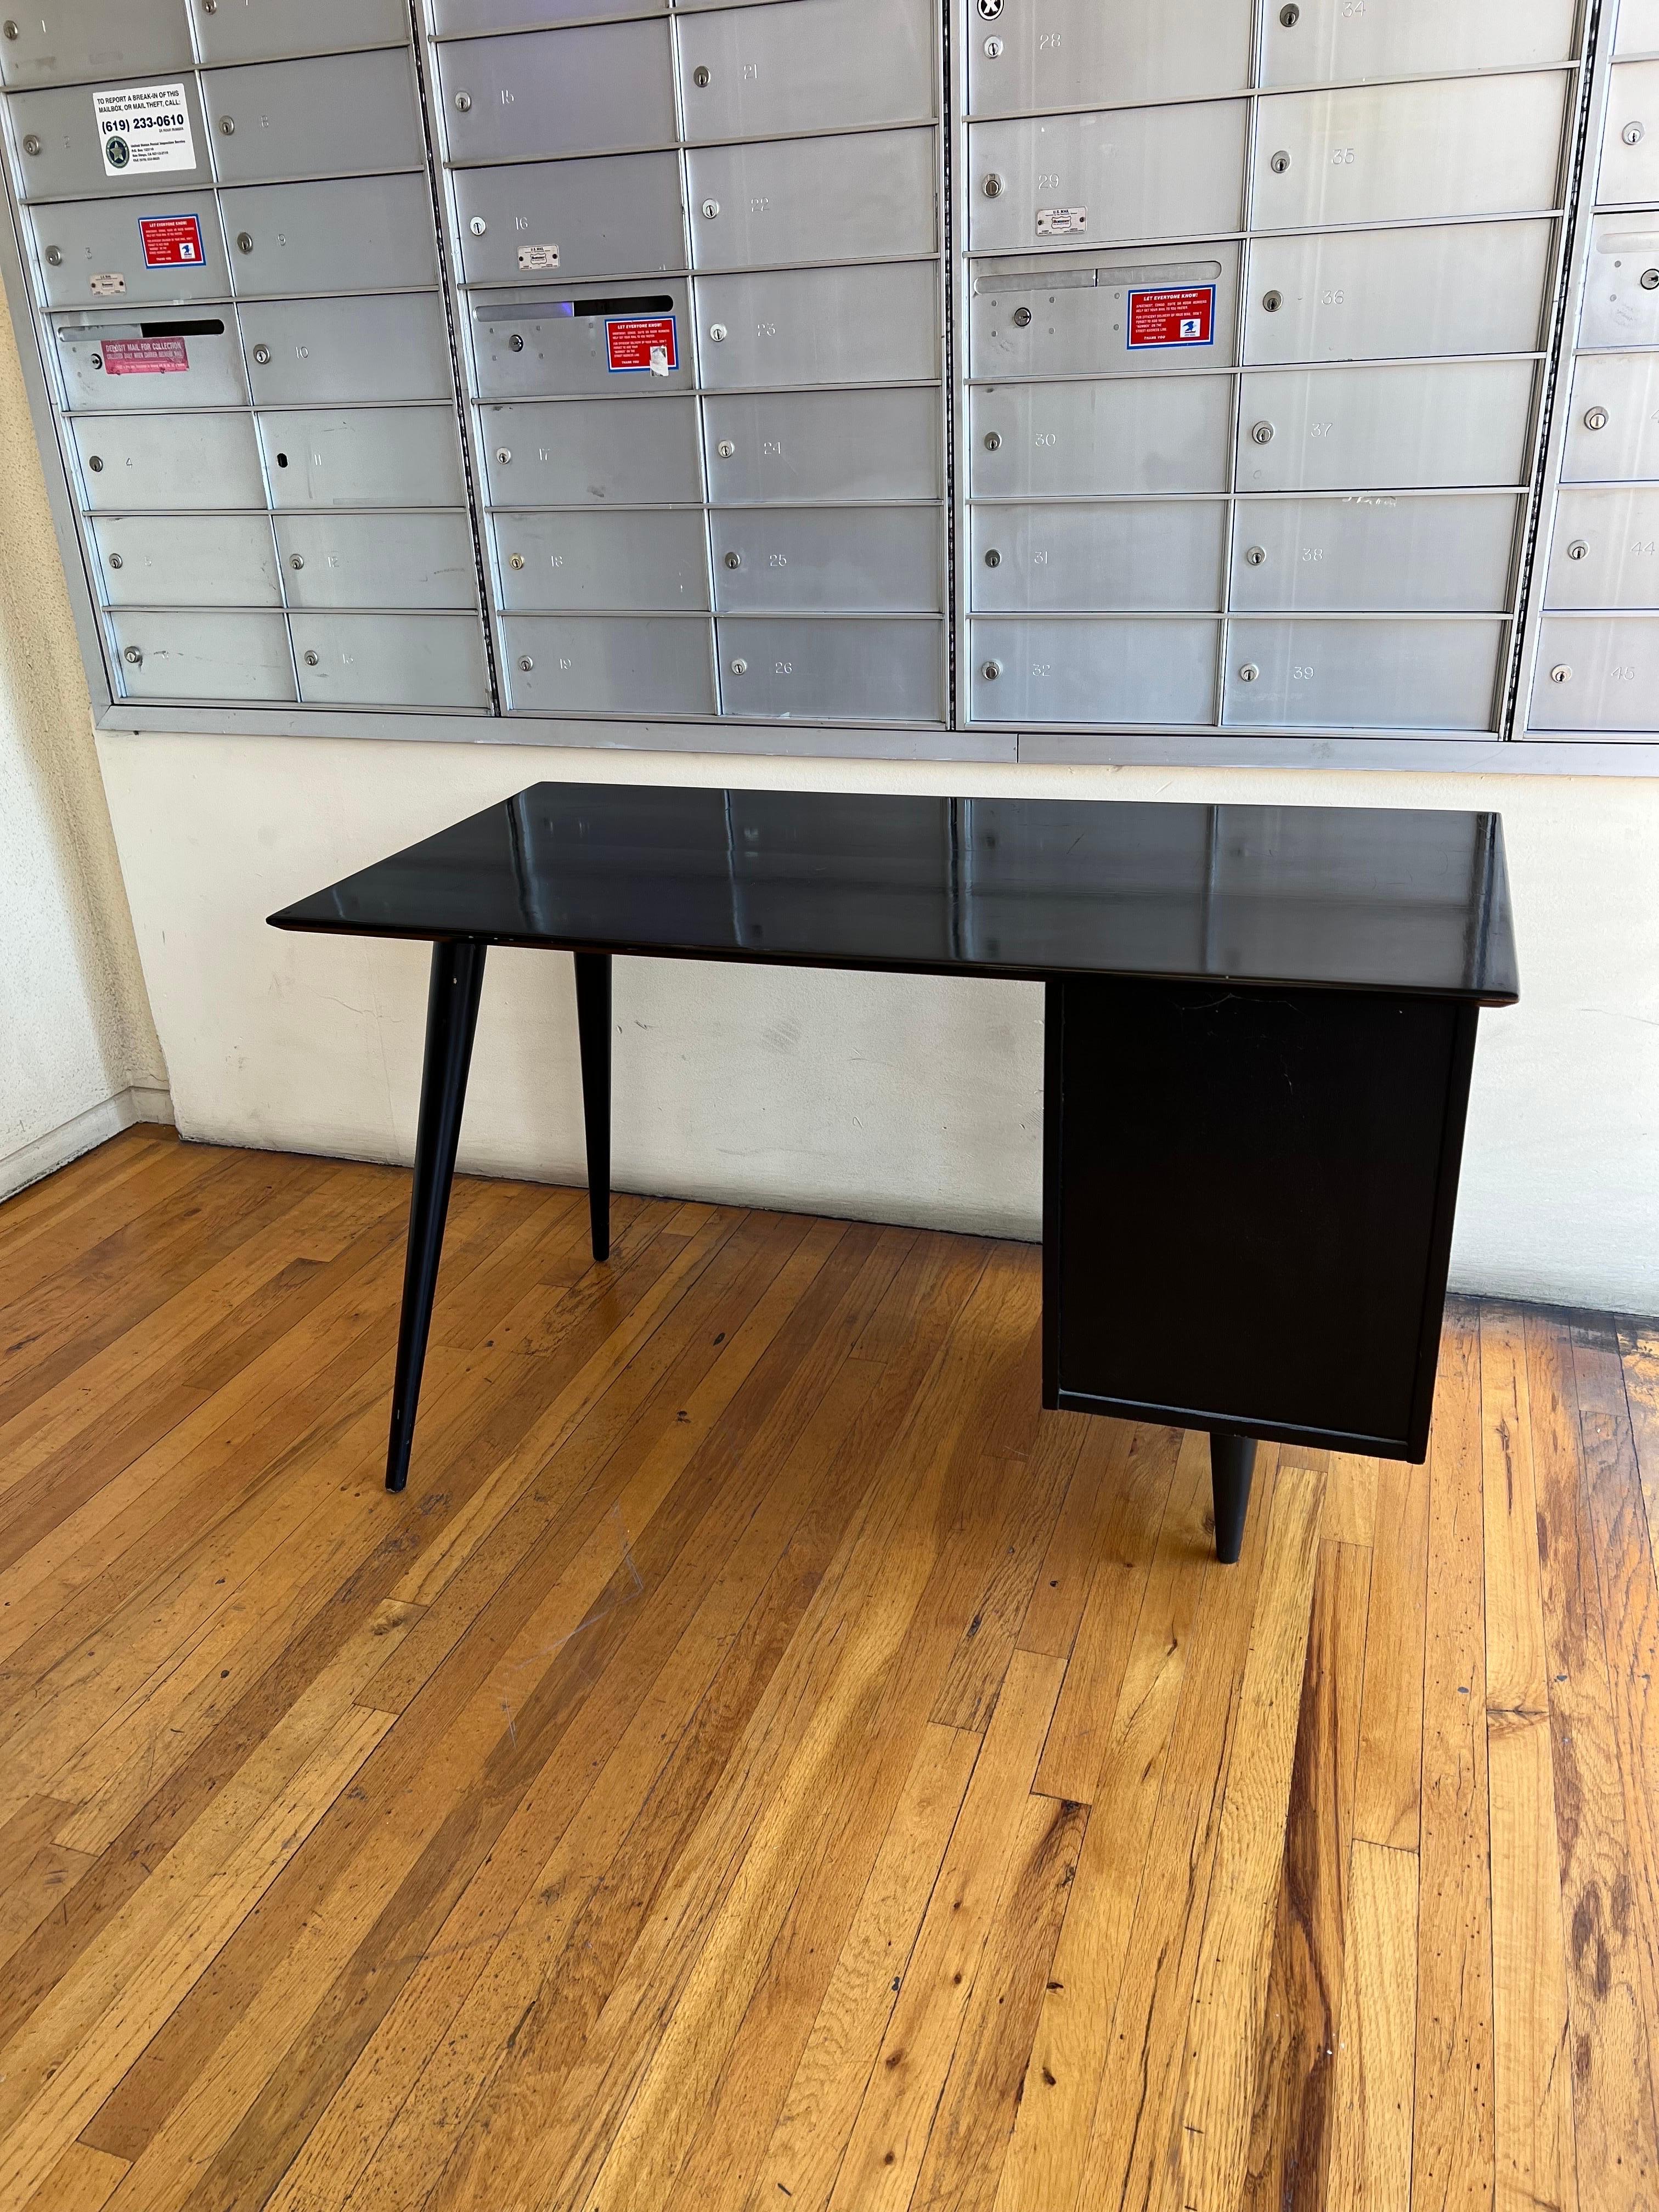 A good-looking Paul McCobb desk and chair, in original black lacquer finish we have cleaned and polished the desk but shows marks due to age we like the look of it nicely worn its Sold as/is condition.